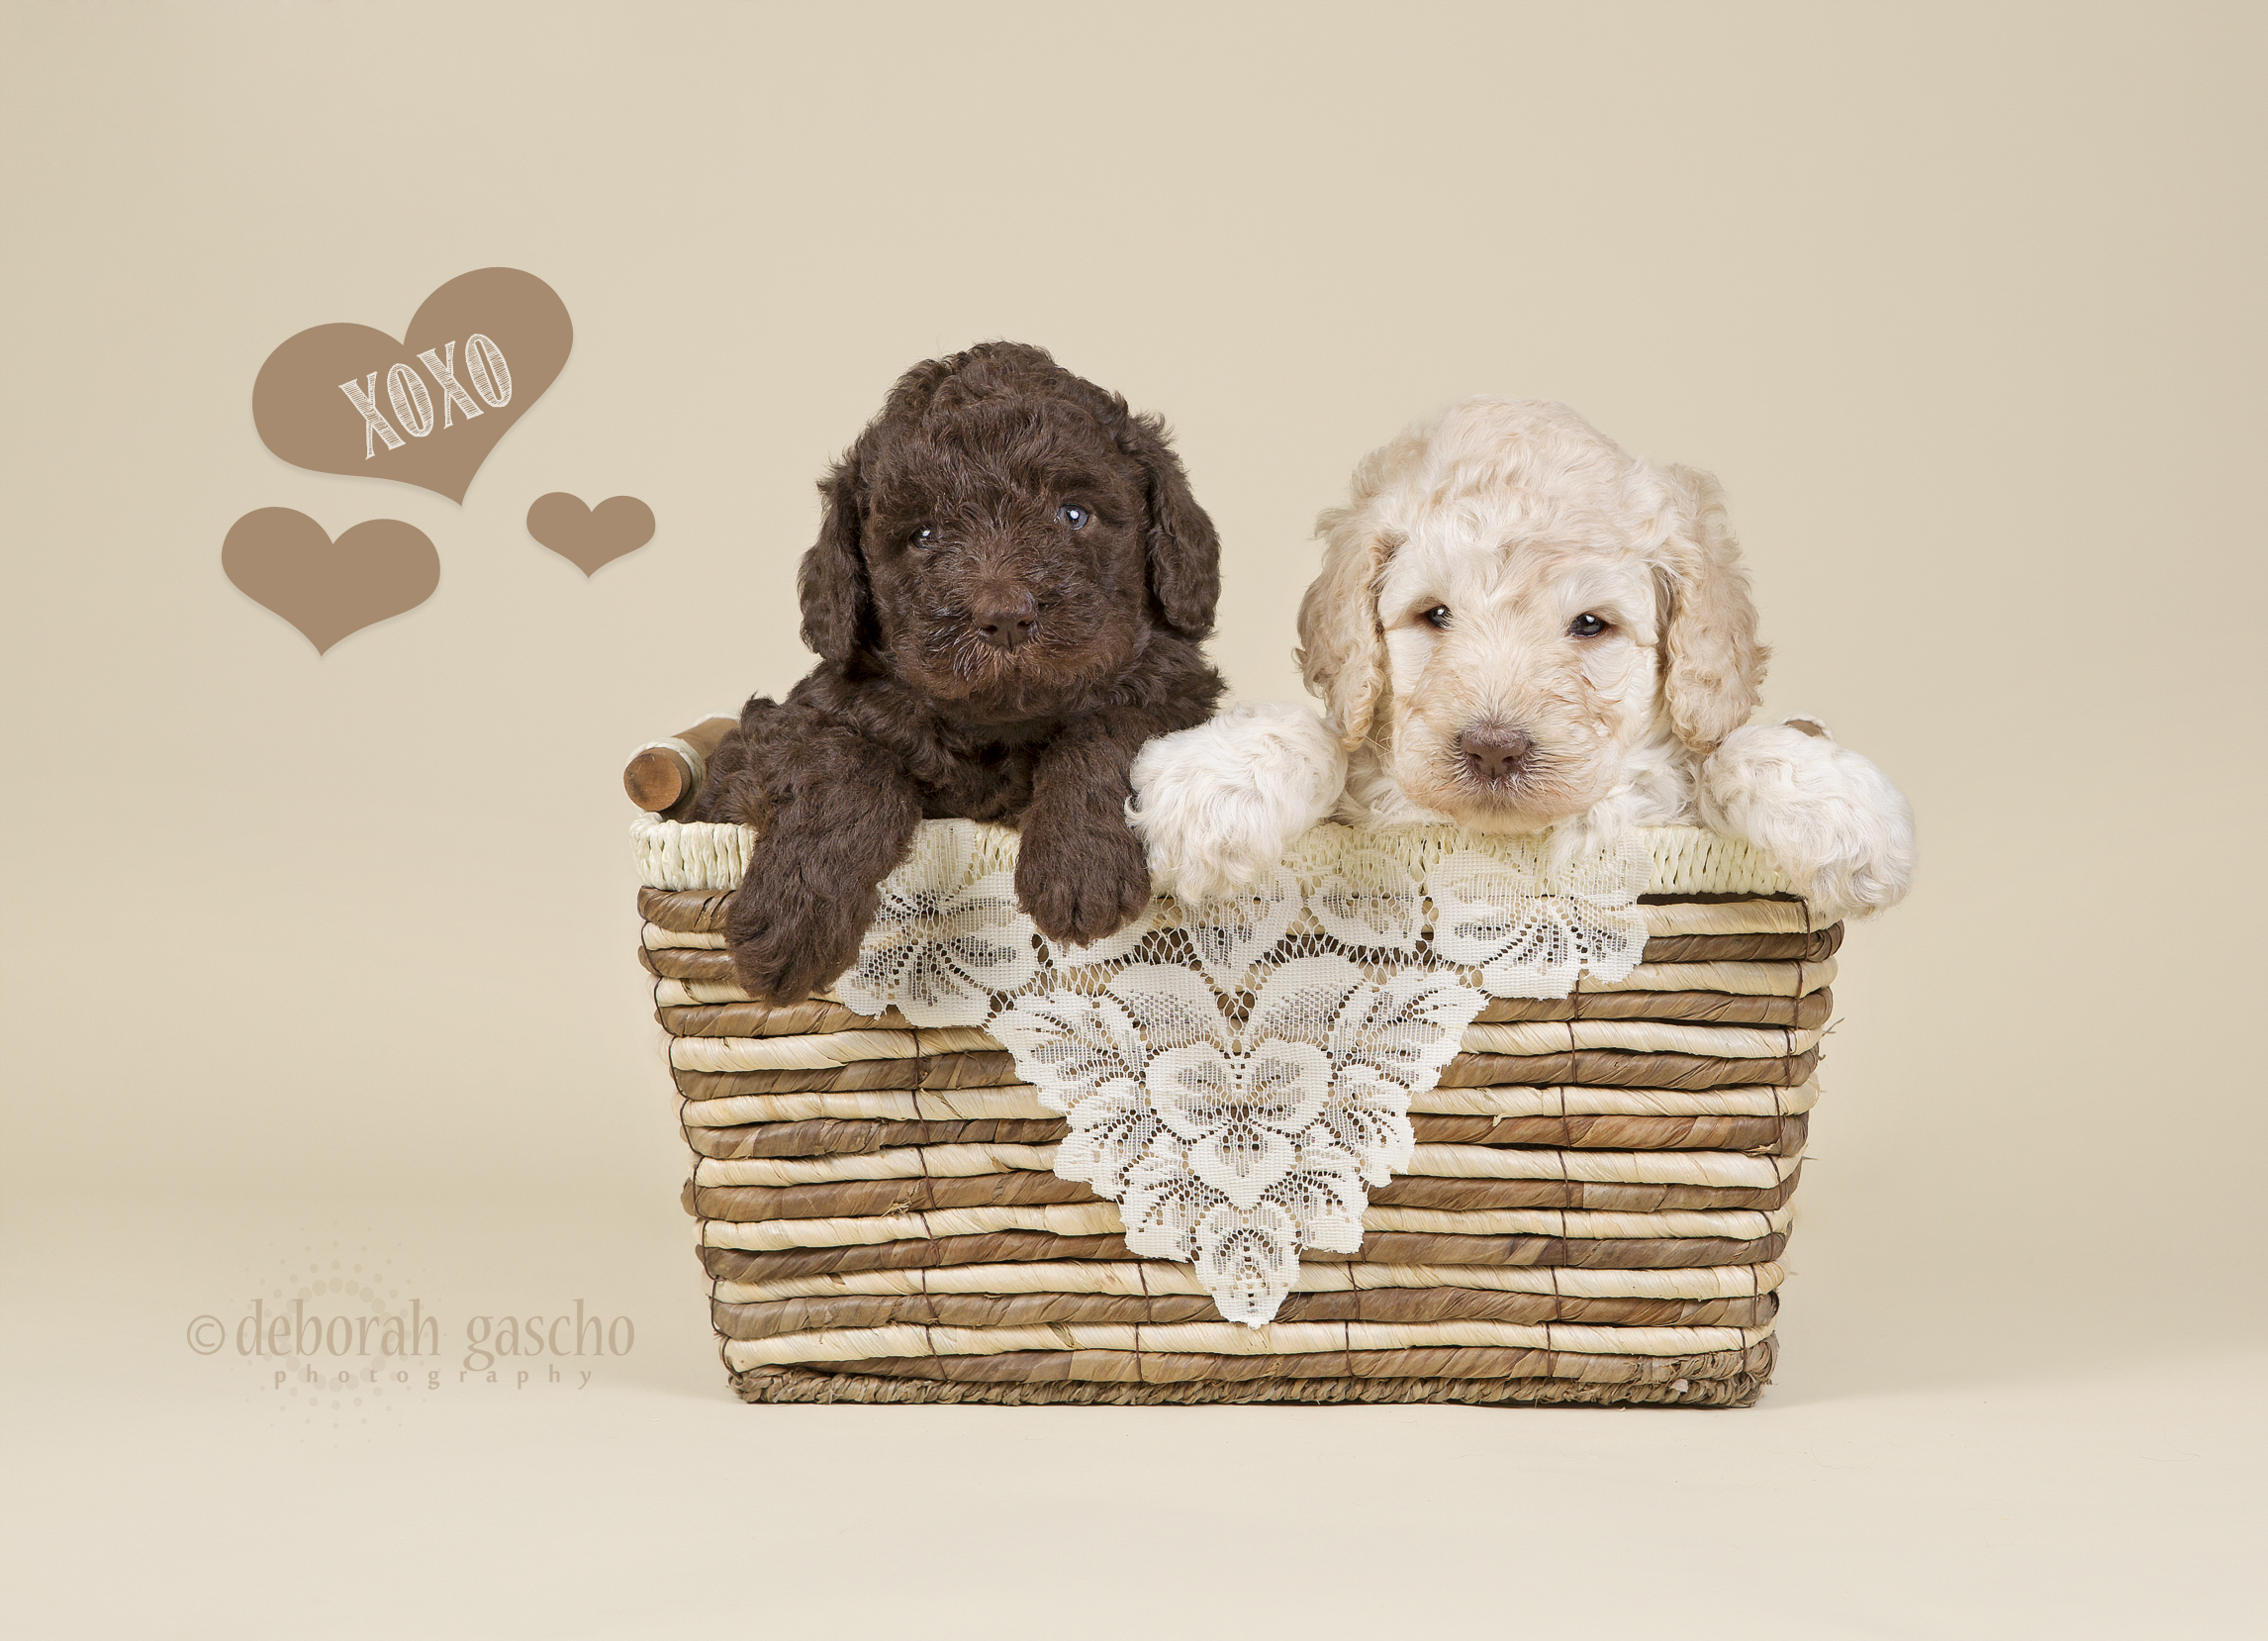 alt="labradoodle puppies for sale in ontario"